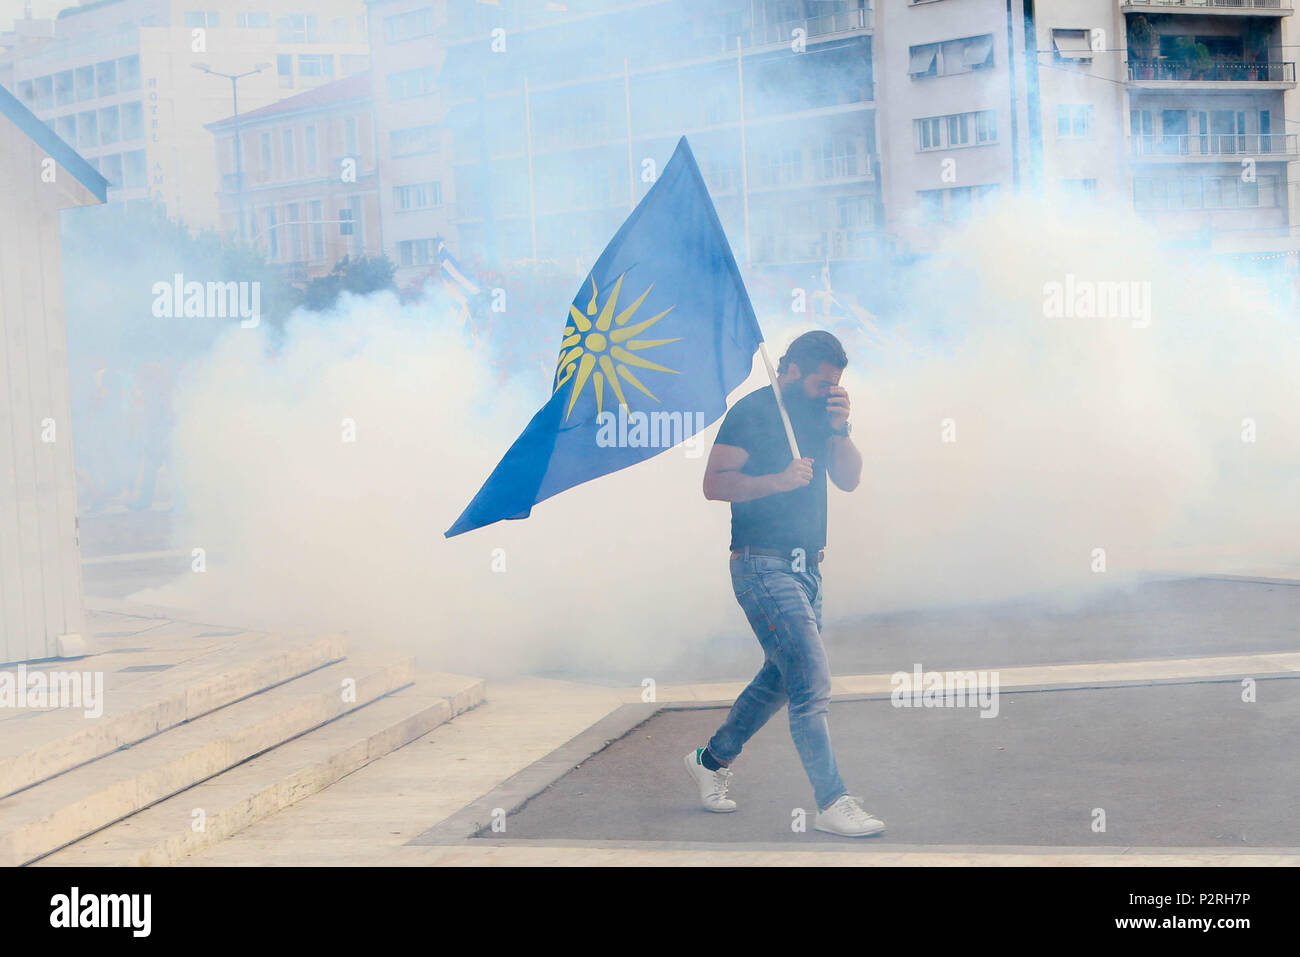 June 16, 2018 - Athens, Greece - Protester leave after riot police throw pepper spray during a protest against the agreement between Greece and Macedonia over the dispute of the former Yugoslav's republic name, outside the Greek Parliament, in Athens. Greek lawmakers on Saturday debated for a final day on a no-confidence motion against the government over a deal to end a decades-old dispute with neighboring Macedonia over the latter's name. (Credit Image: © Aristidis Vafeiadakis via ZUMA Wire) Stock Photo